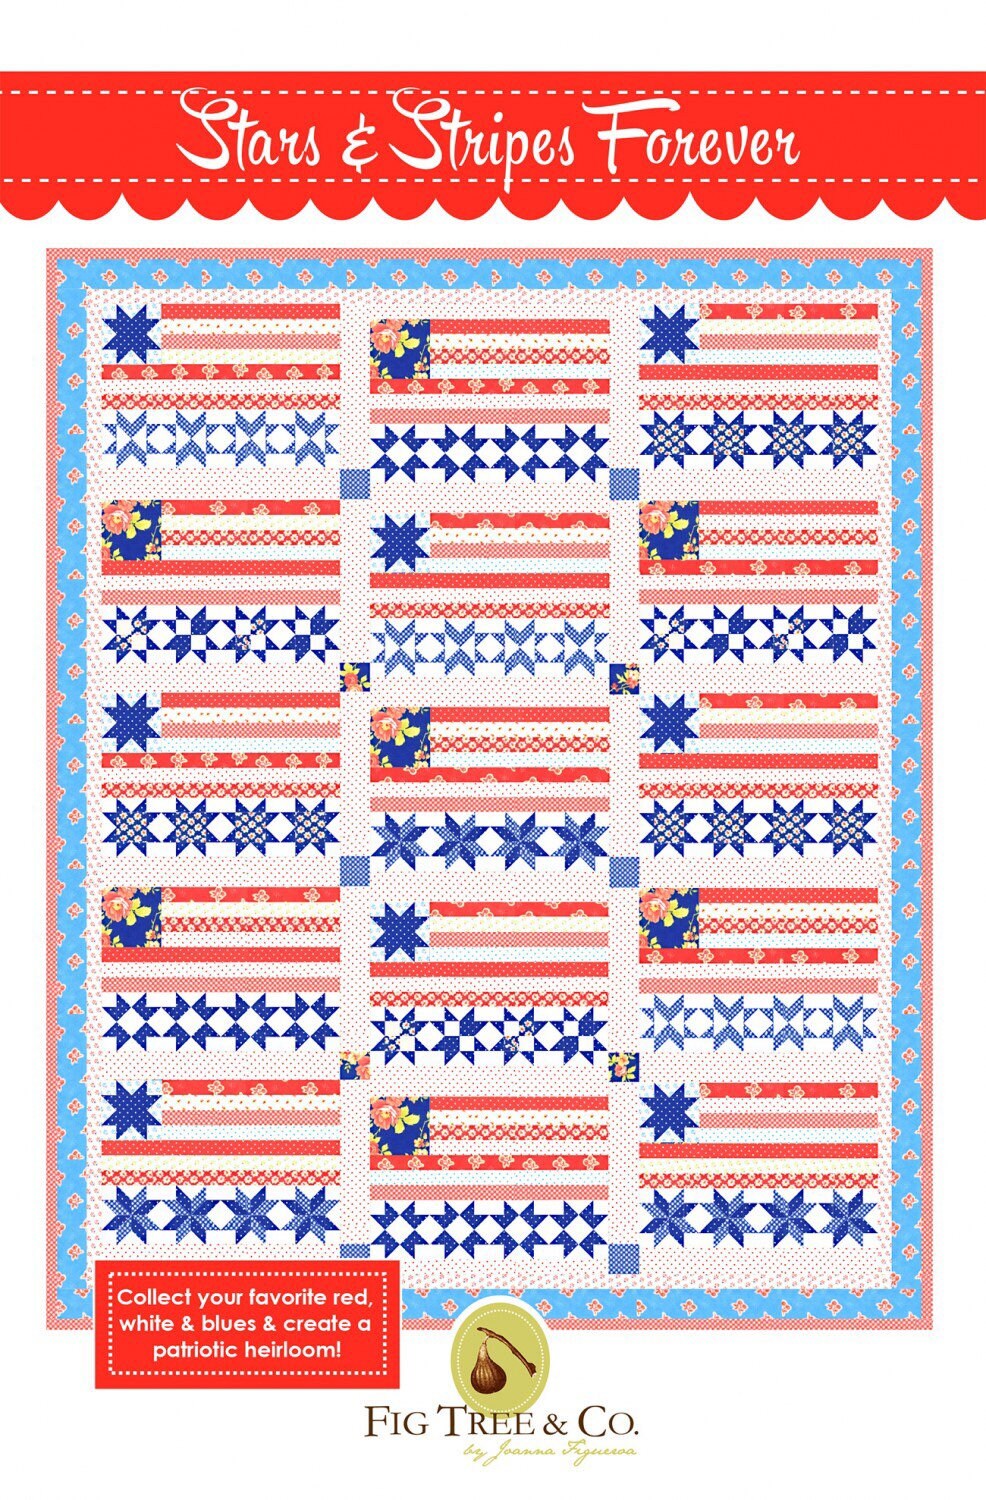 Stars and Stripes Forever Quilt Pattern - Fig Tree Quilts - Joanna Figueroa - Patriotic Quilt Pattern